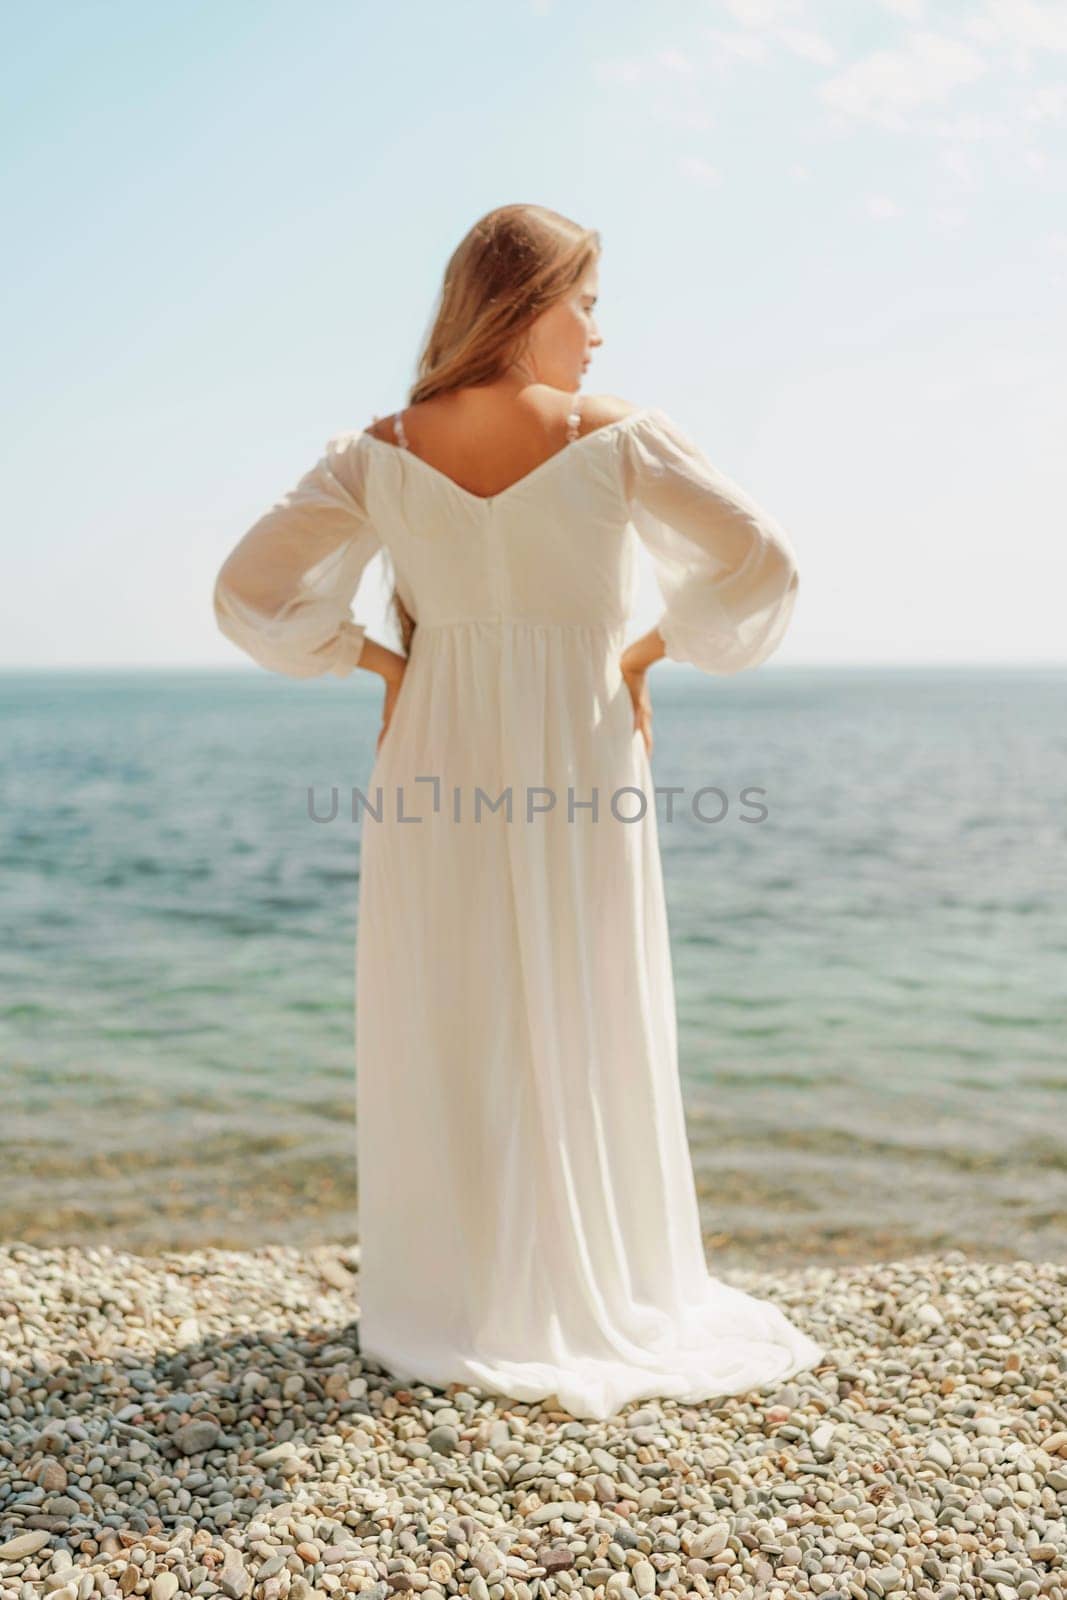 woman white dress stands on a beach, looking out at the ocean. She is in a contemplative or reflective mood, as she raises her hands above her head. Concept of peace and tranquility. by Matiunina